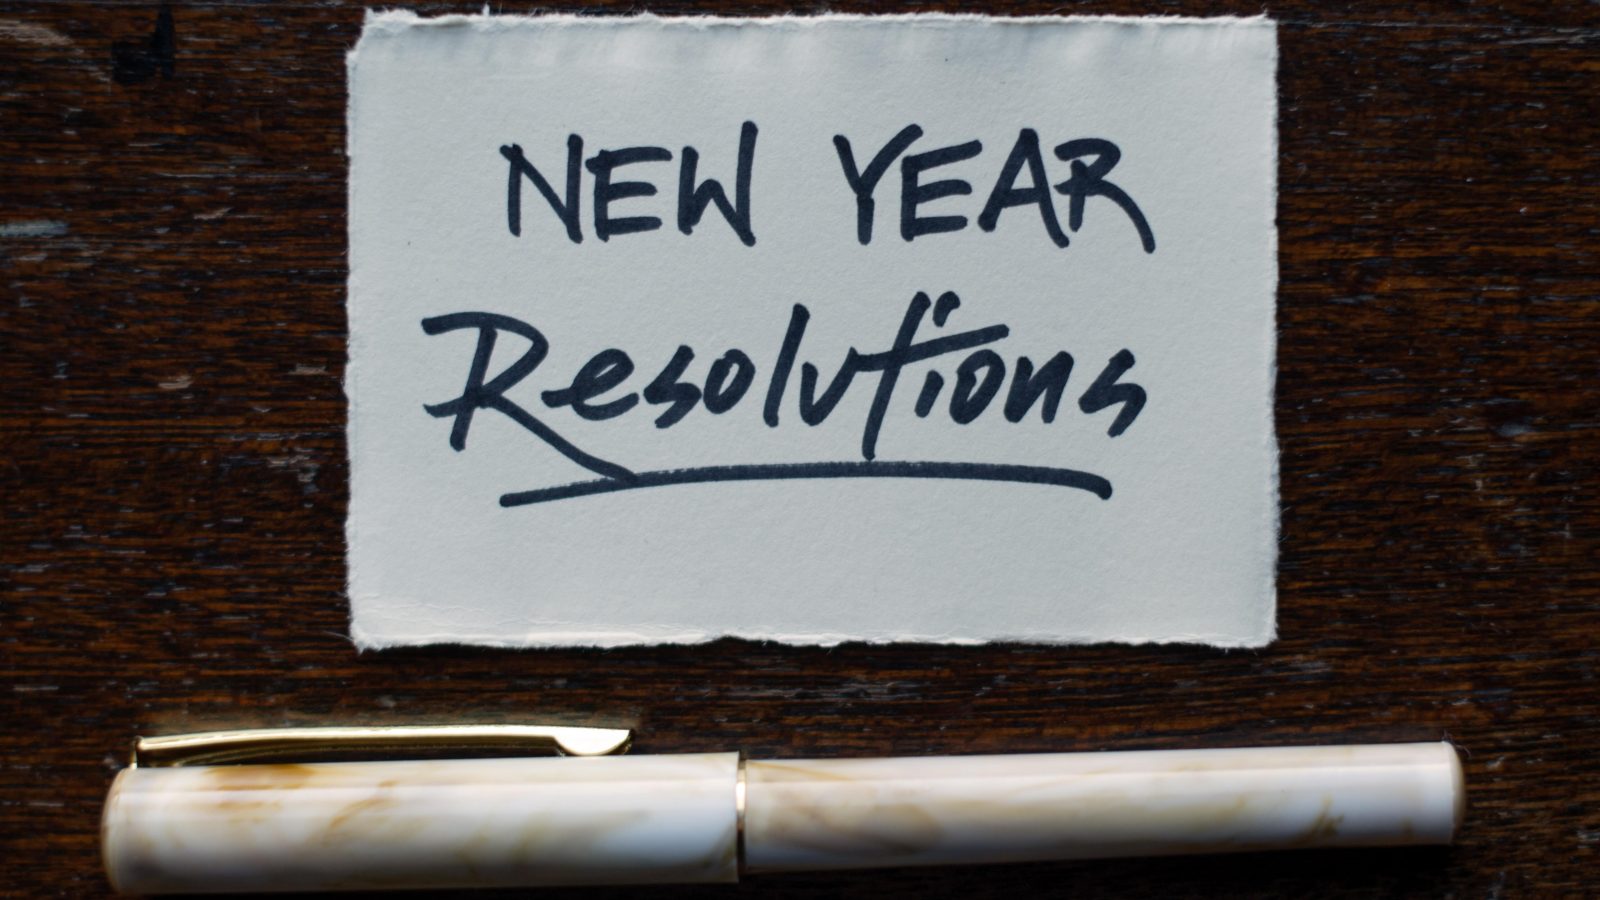 Pen and paper for New Year resolutsions